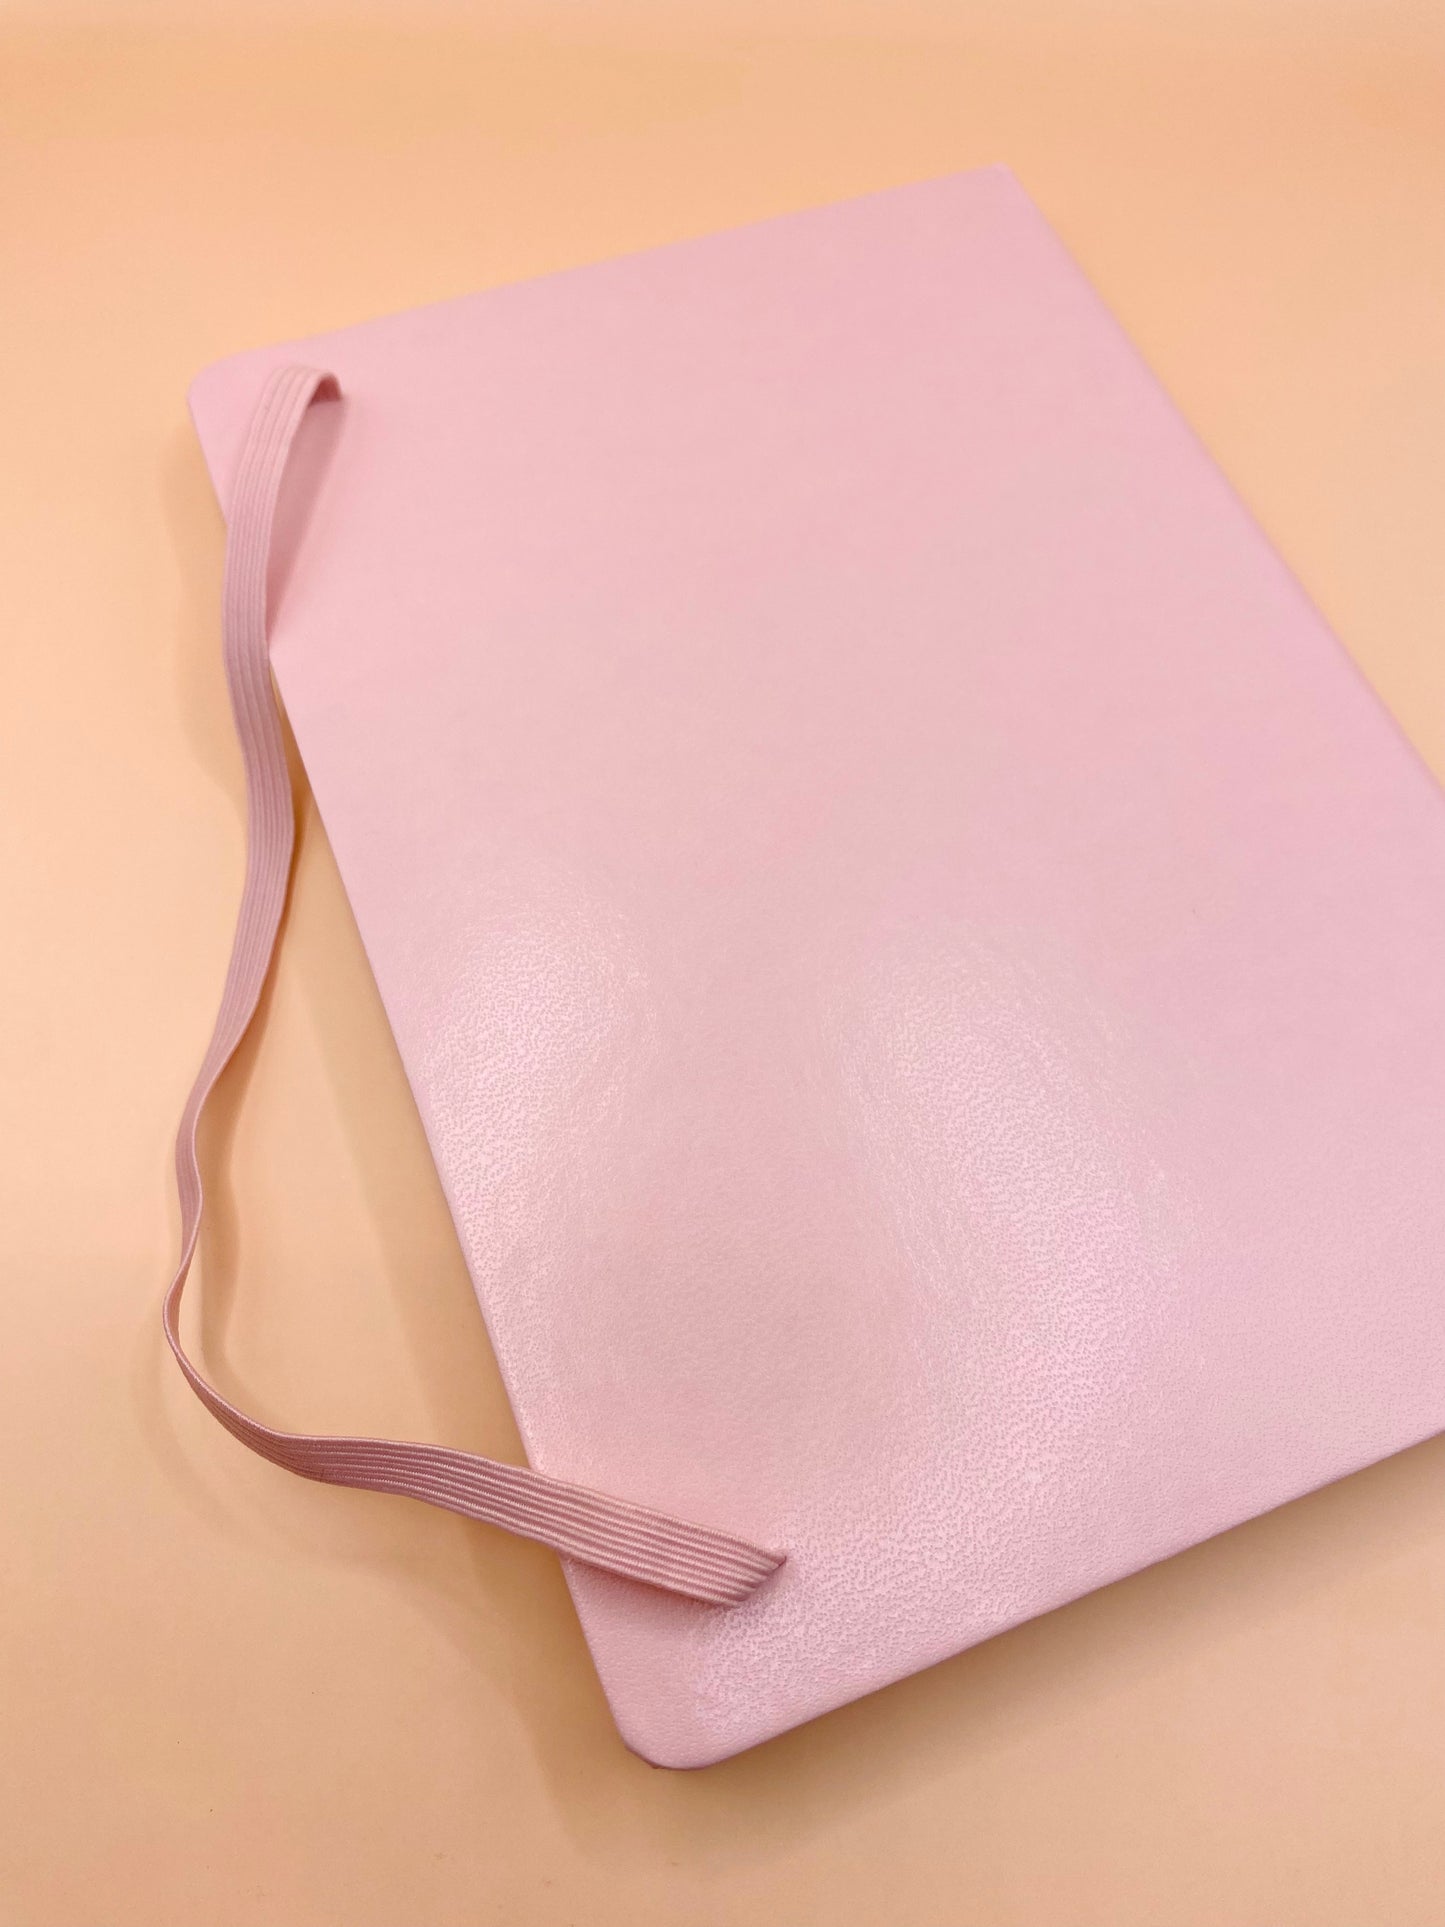 Blush Pink Journal Lined Notebook: Don't Overthink It